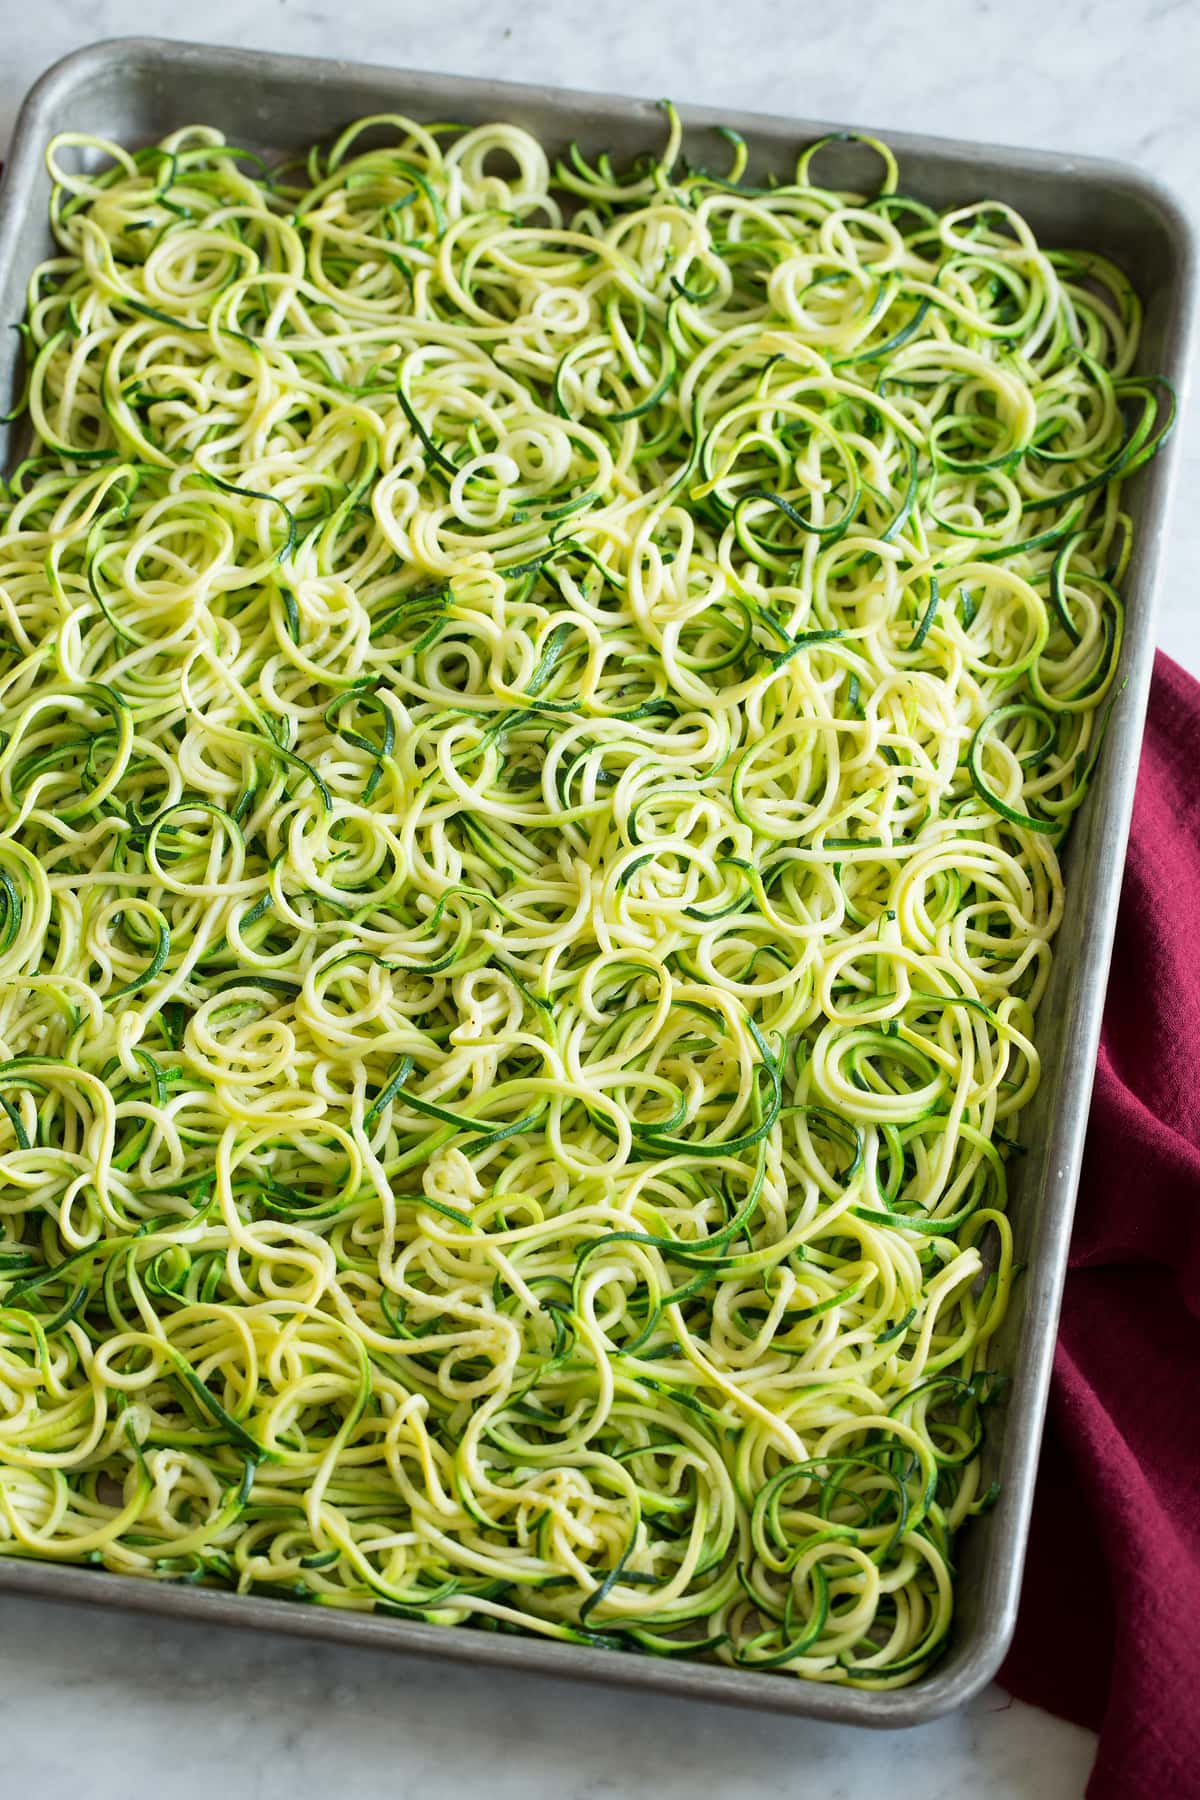 Roasted zoodles shown on a baking sheet from a side angle.